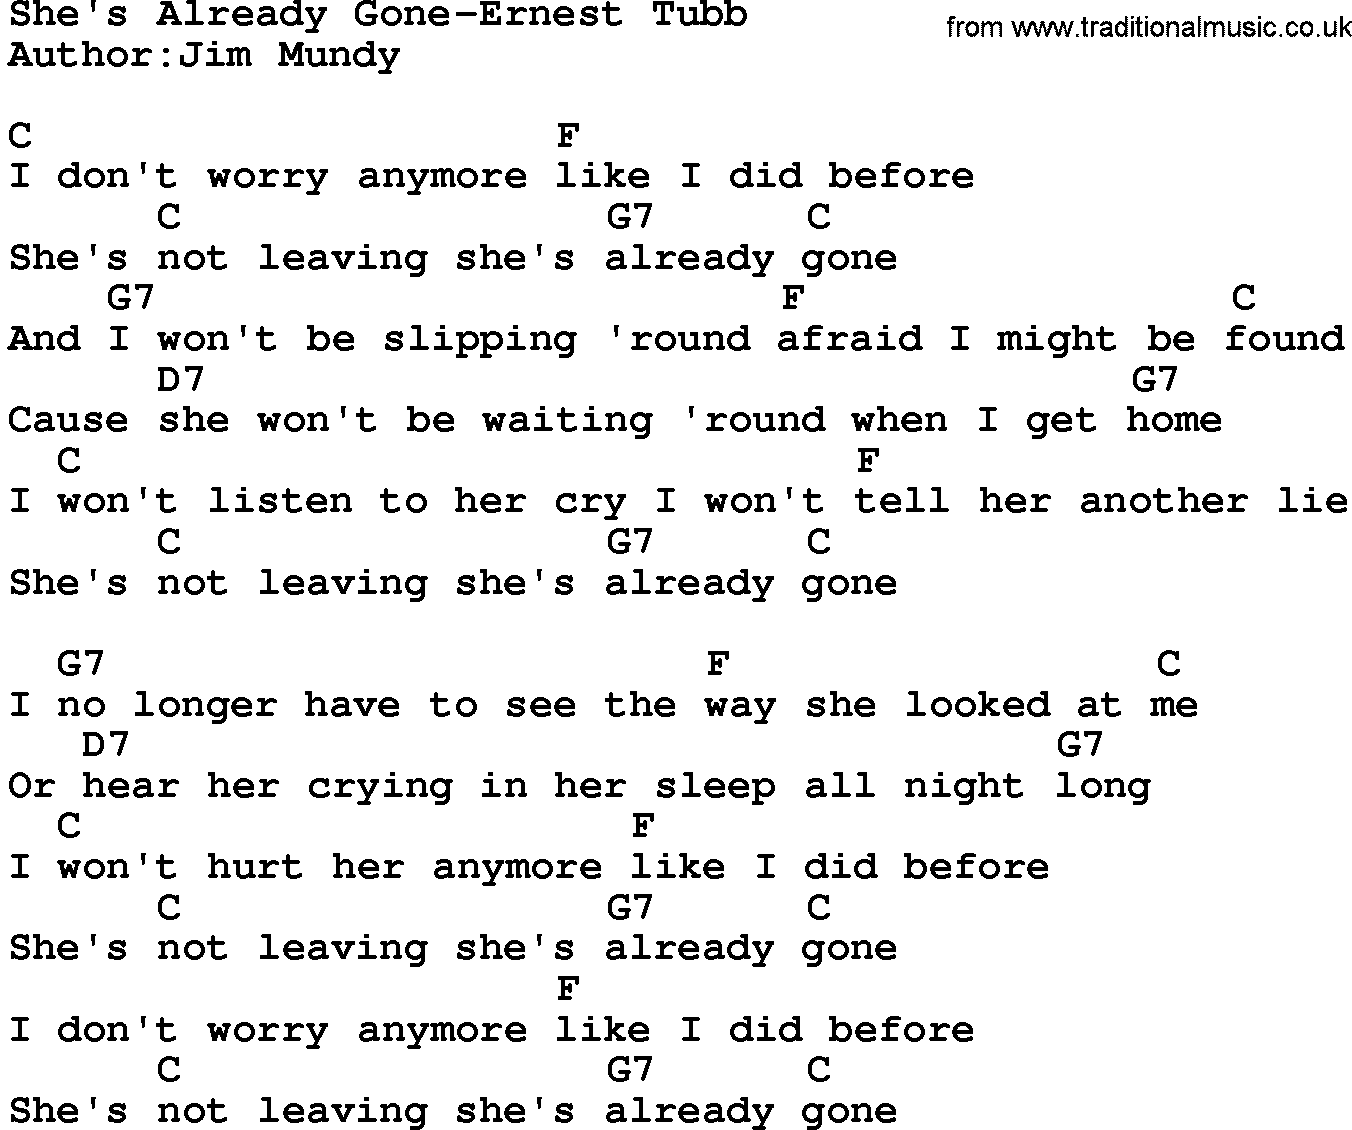 Country music song: She's Already Gone-Ernest Tubb lyrics and chords